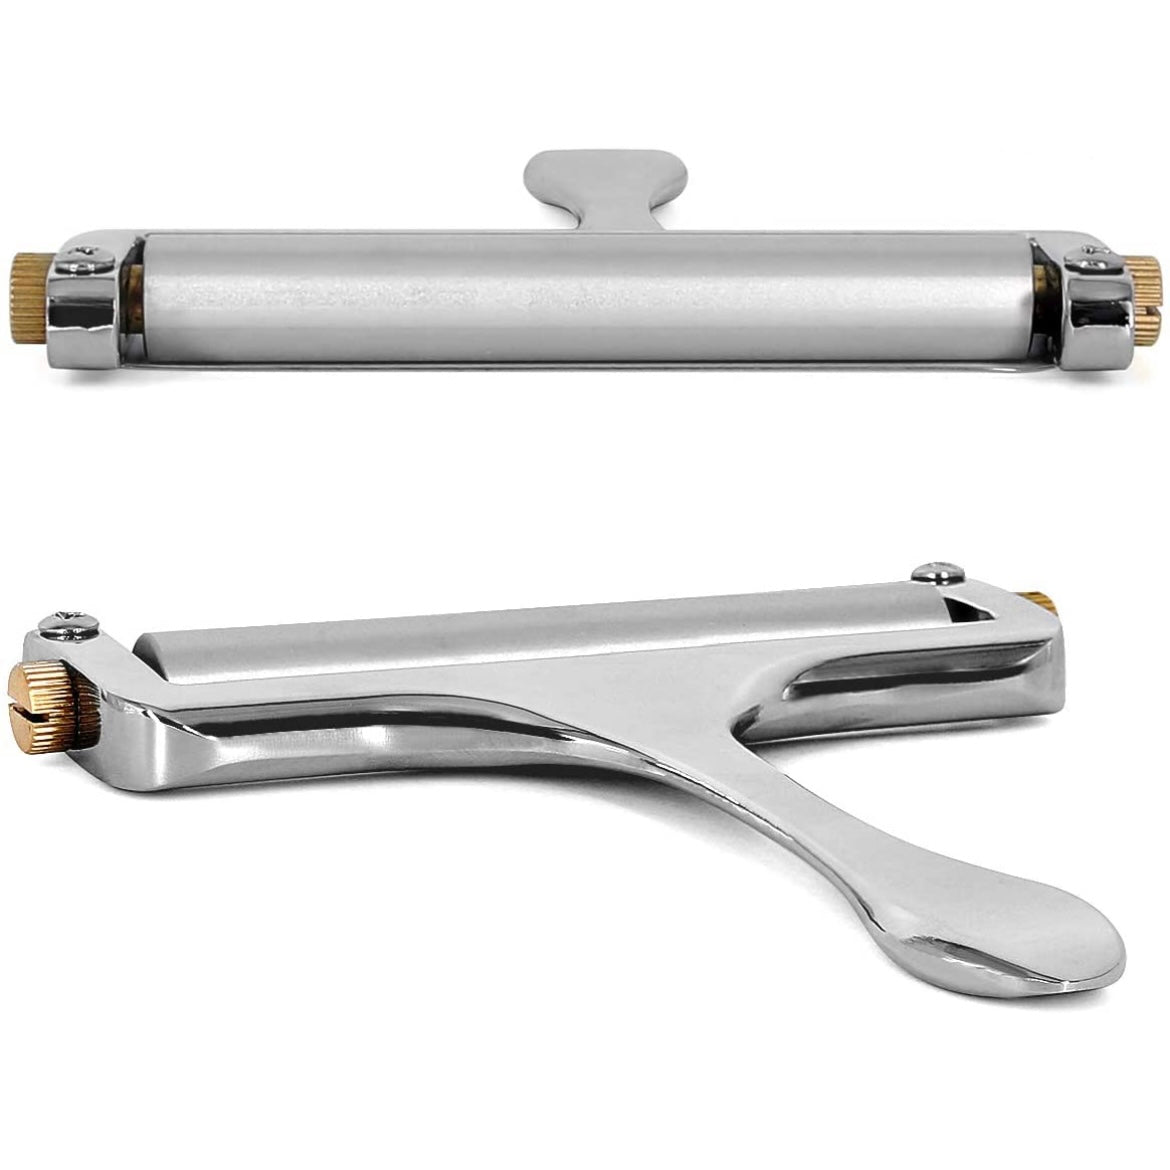 Adjustable Stainless Steel Wire Cheese Cutter